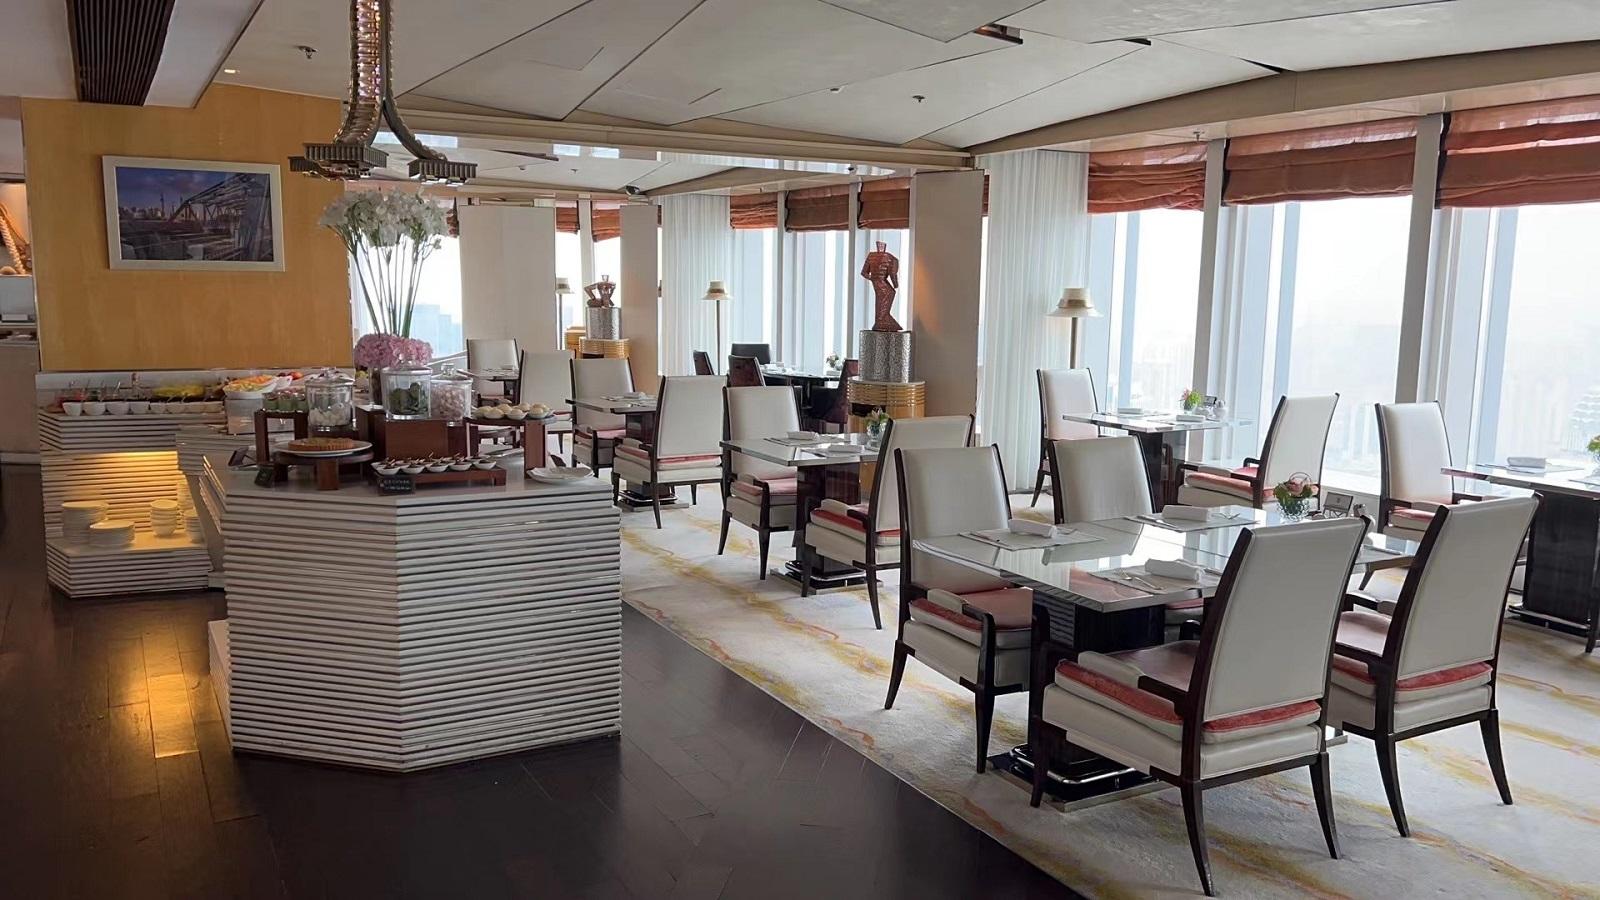 The Ritz-Carlton Shanghai, Pudong Executive Club Lounge Overview